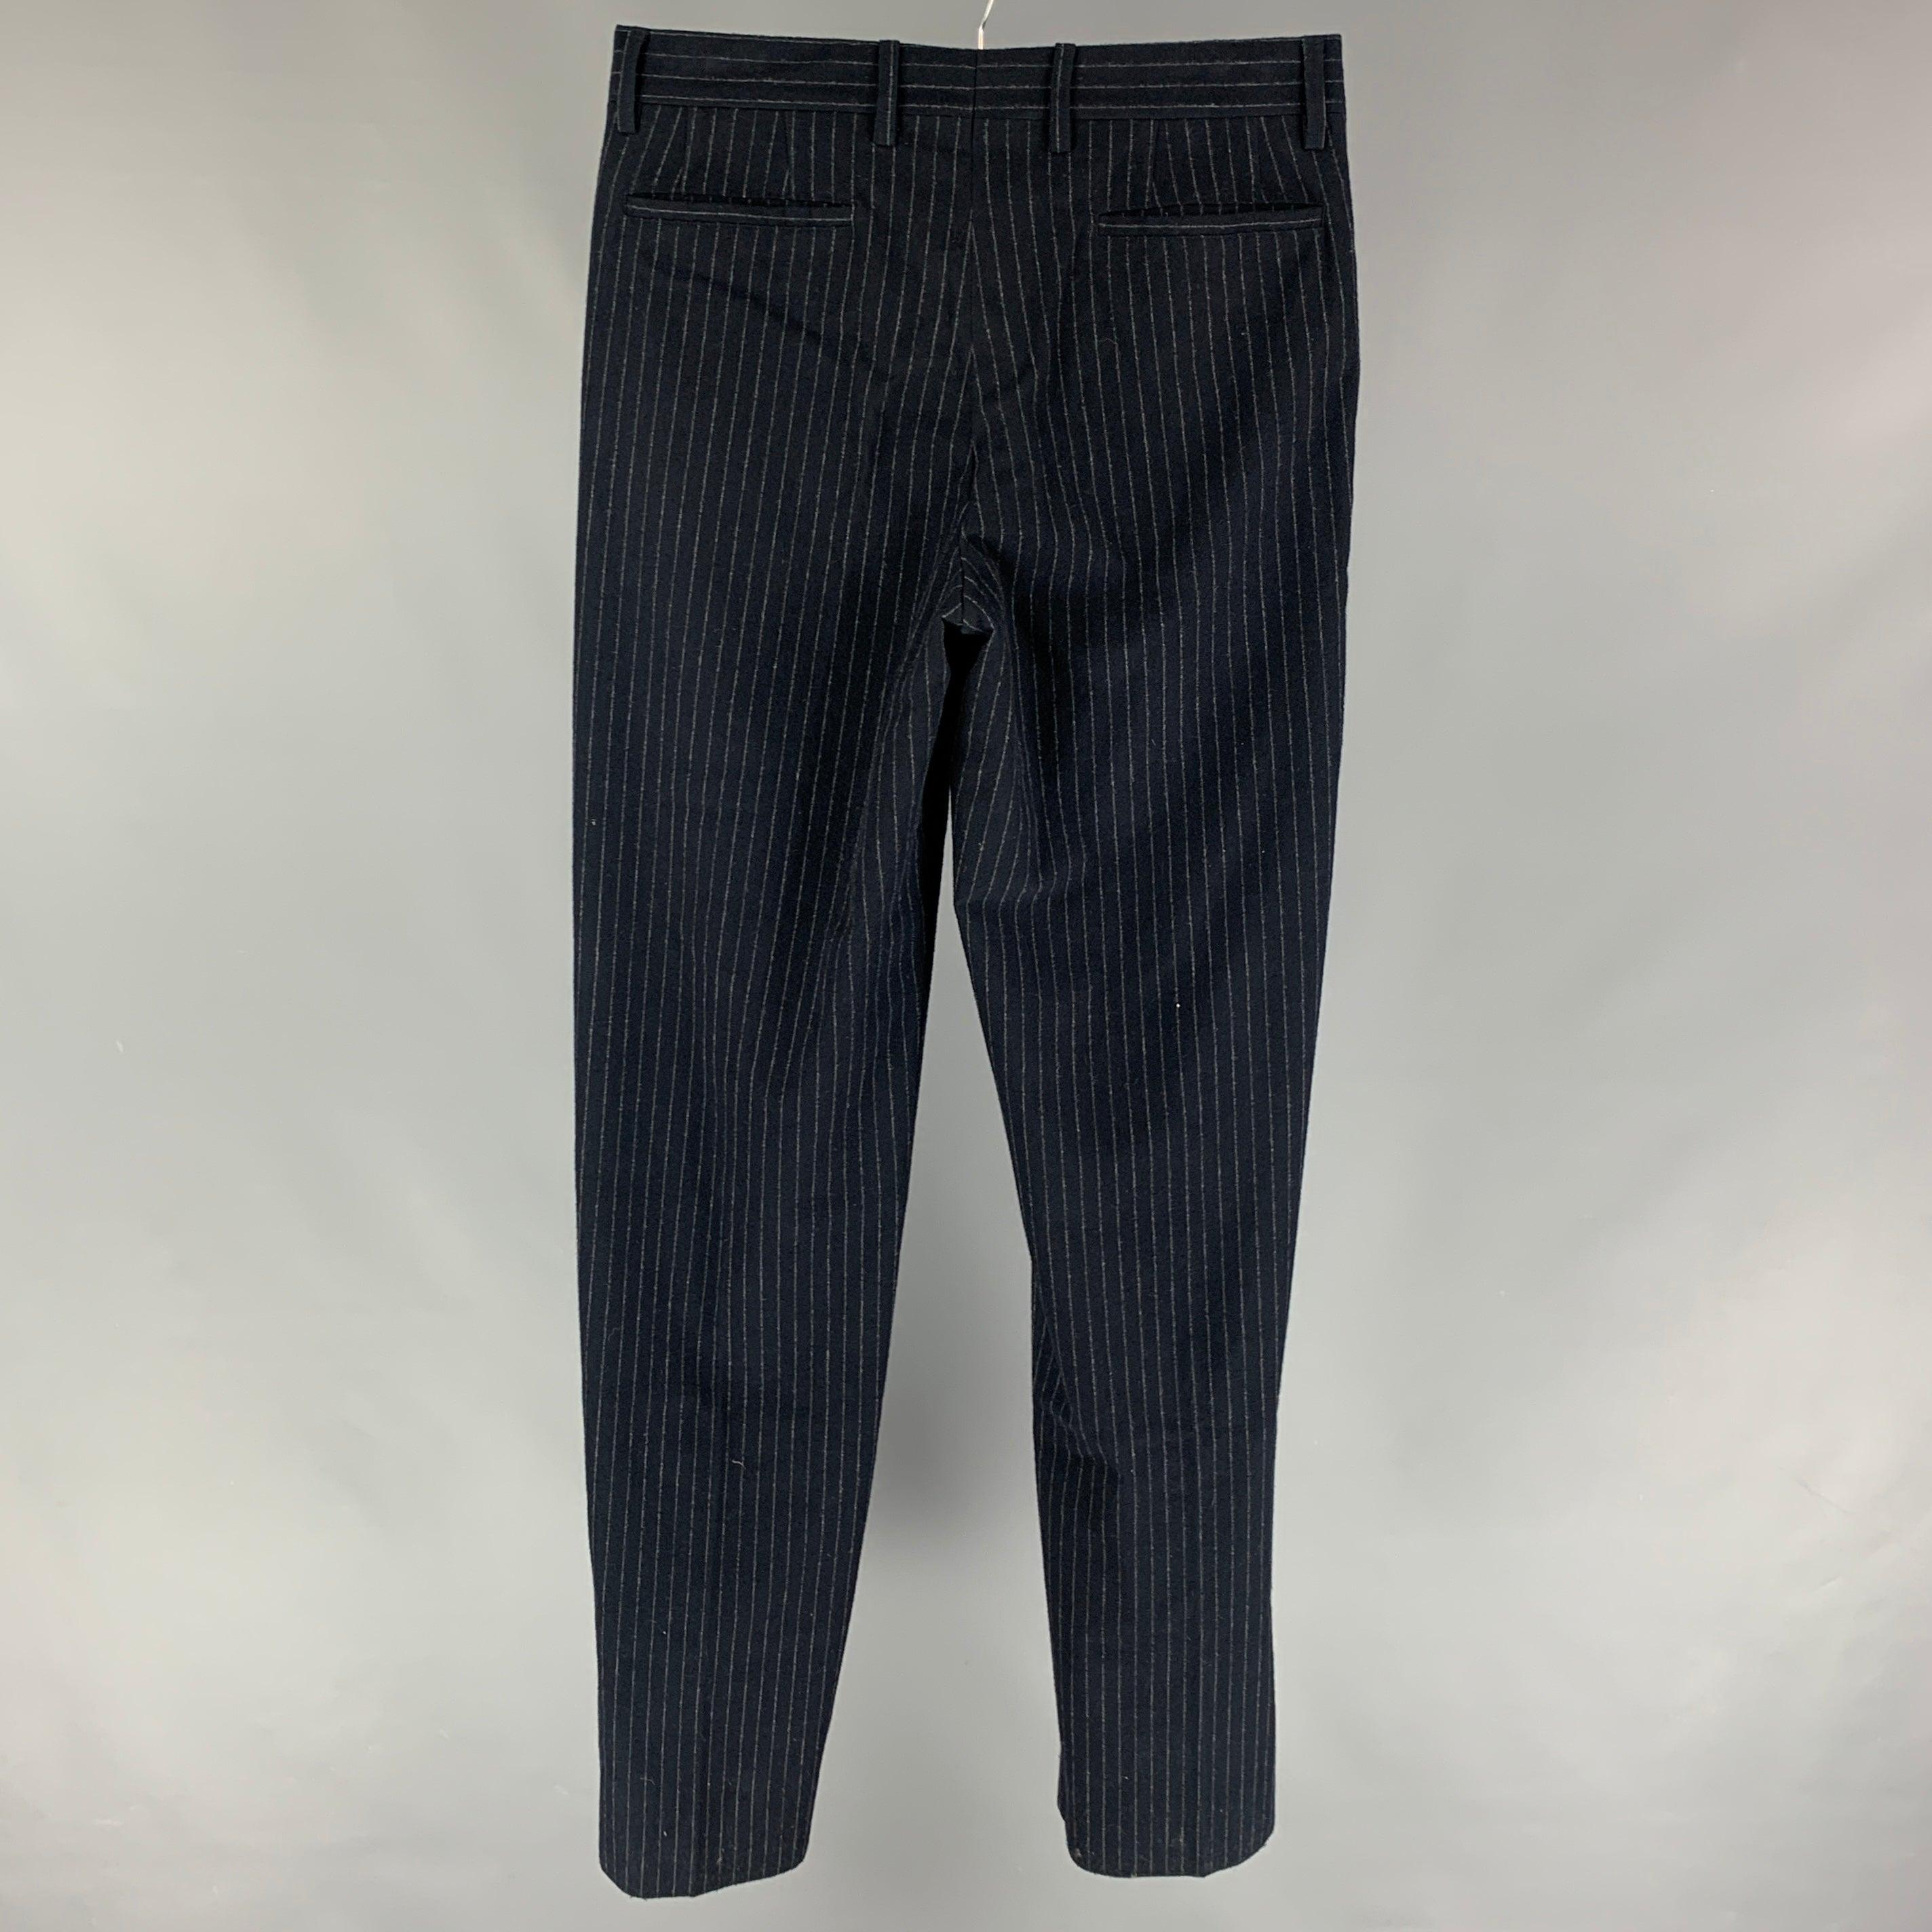 GIORGIO ARMANI dress pants comes in a navy pinstripe wool blend featuring a flat front and a zip fly closure. Made in Italy.
 New With Tags.
  
 

 Marked:  48 
 

 Measurements: 
  Waist: 32 inches Rise: 11 inches Inseam: 38 inches 
  
  
  
 Sui